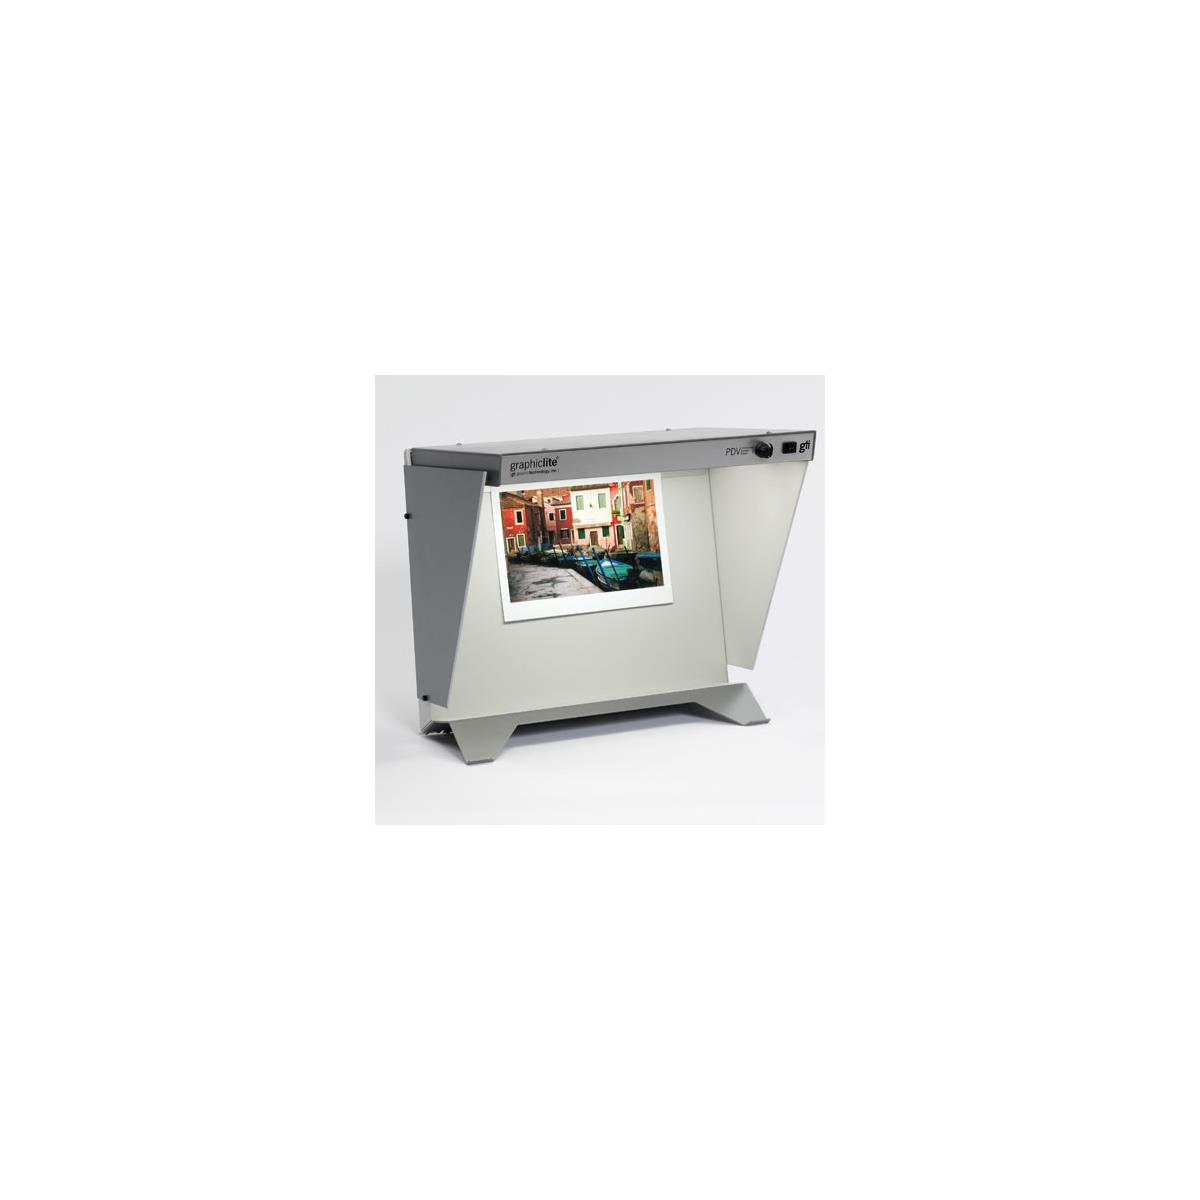 Image of GTI Professional Desktop Viewing System with Full Range Dimming Feature